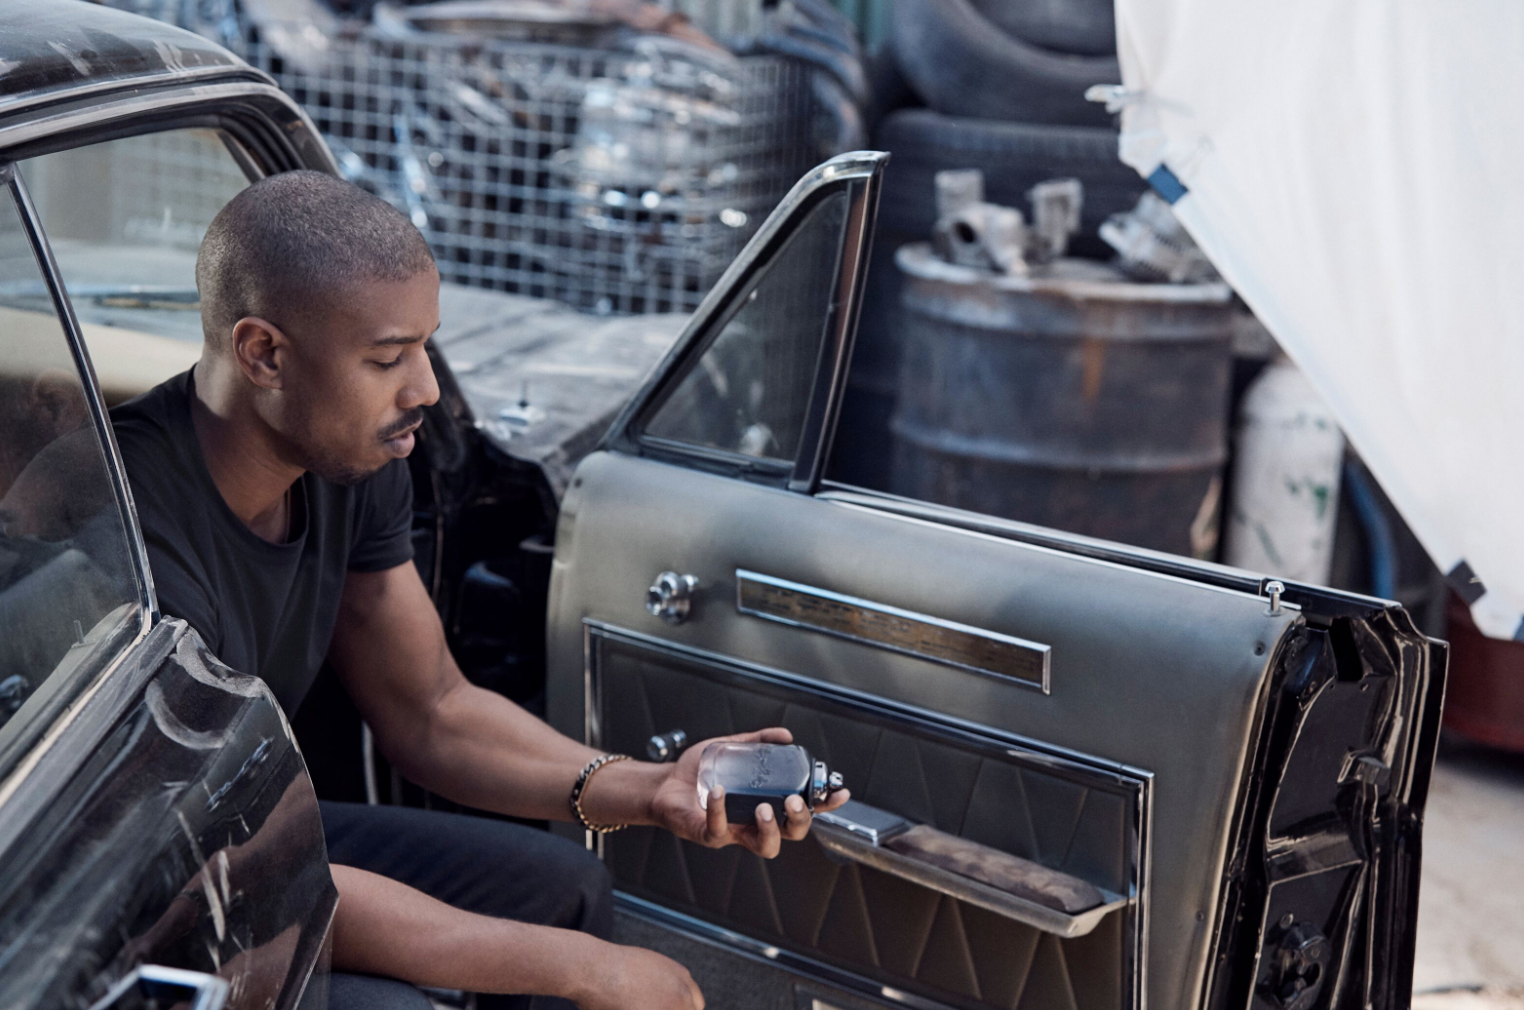 Michael B. Jordan partners with Coach for their latest men's fragrance